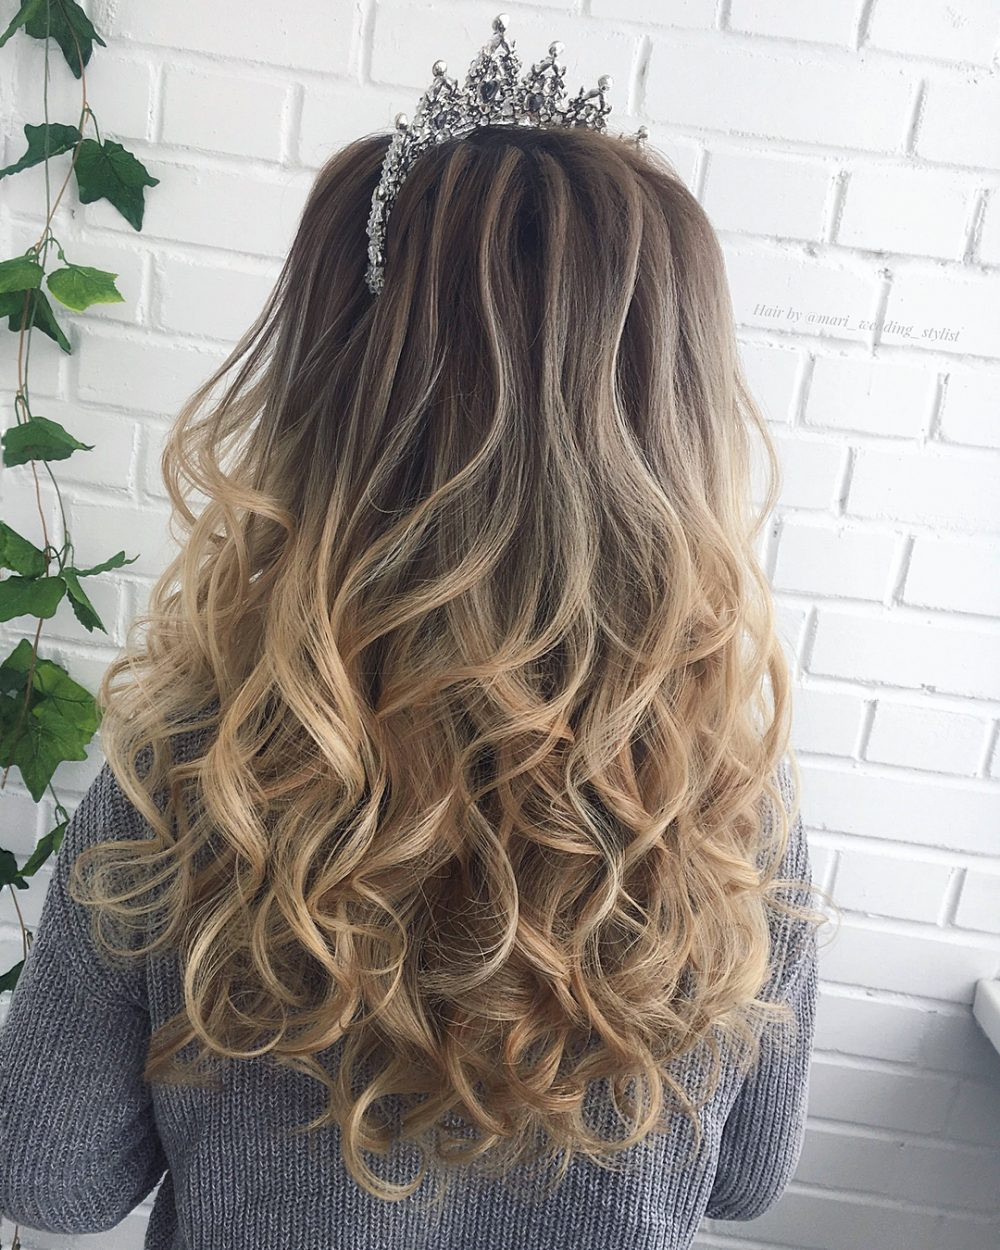 Hair Down Prom Hairstyles
 22 Perfectly Gorgeous Down Hairstyles for Prom